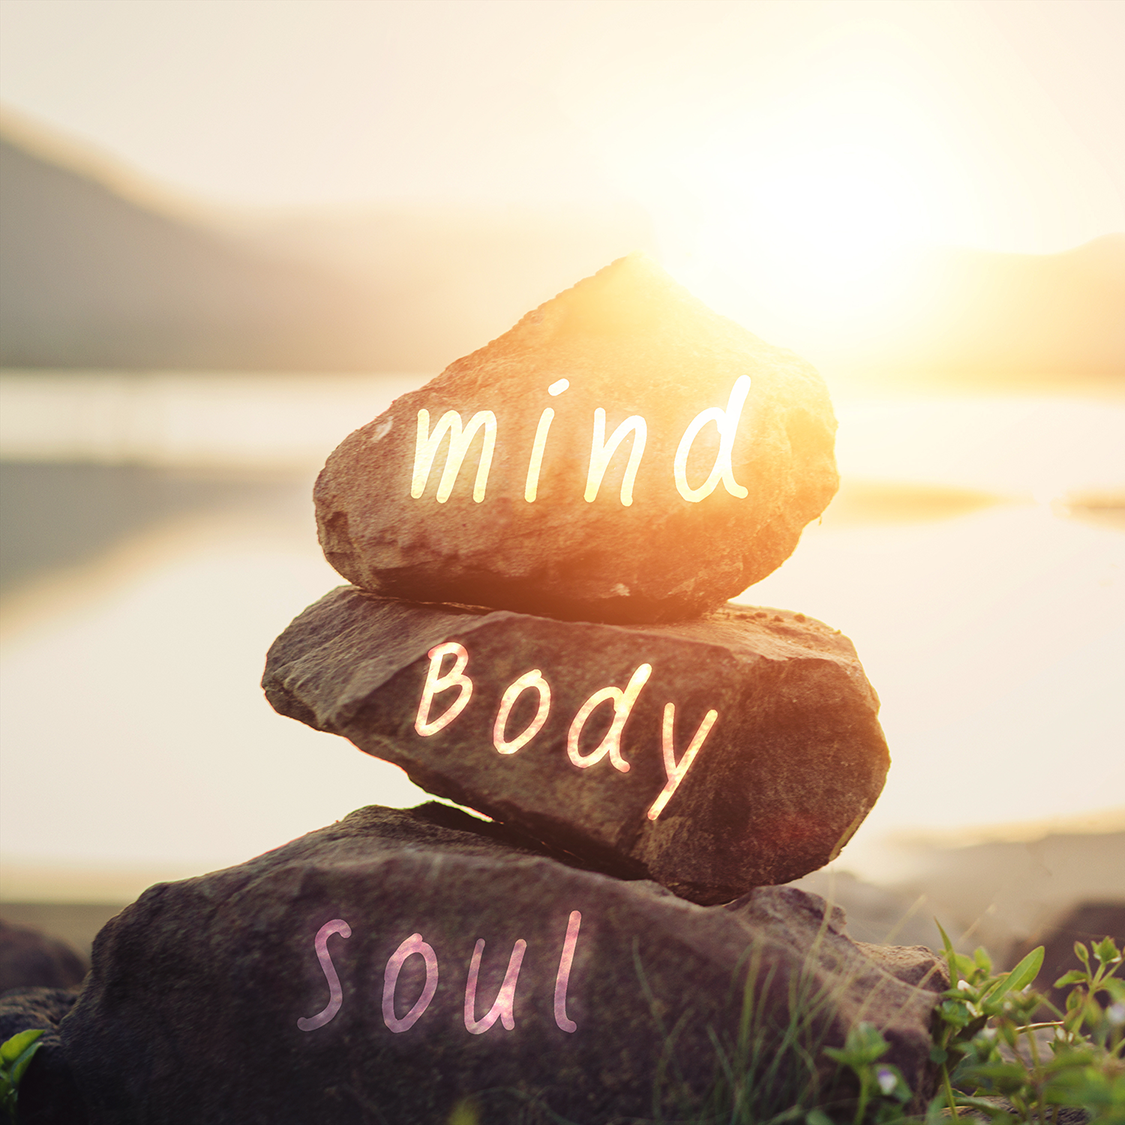 massage therapy sessions that help balance mind, body and soul